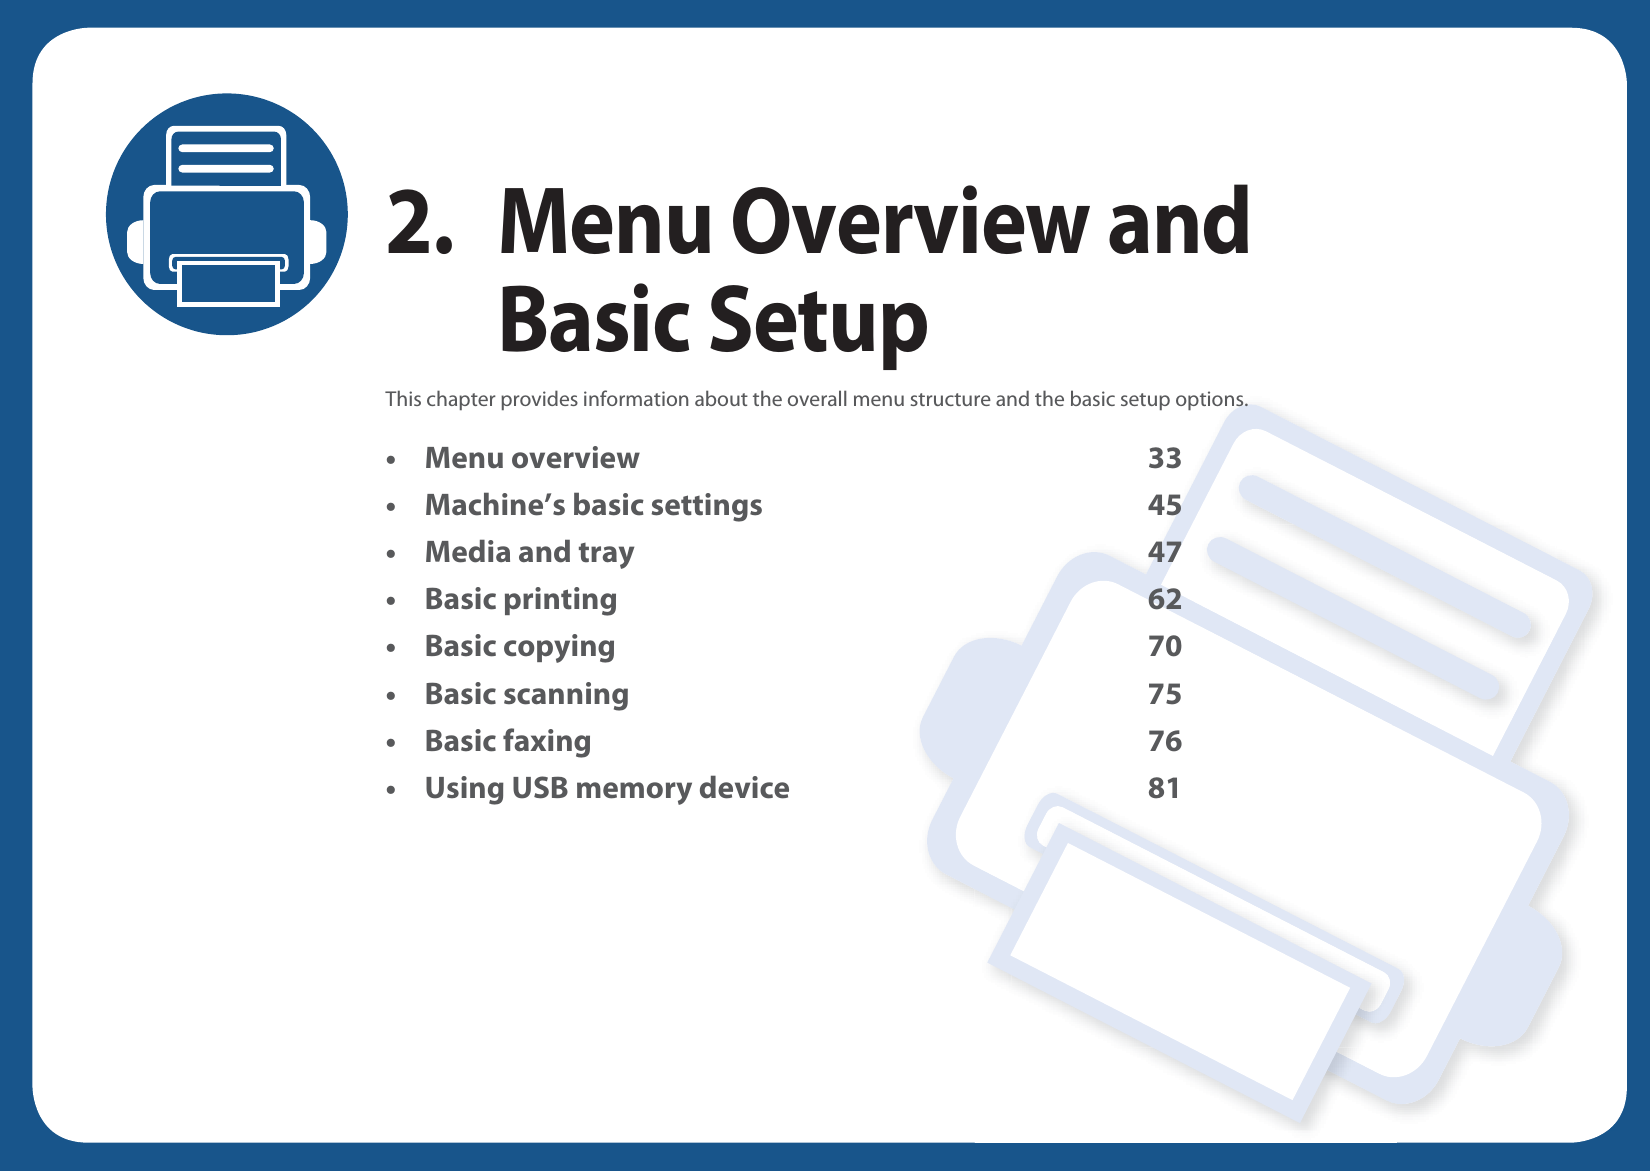 2. Menu Overview and Basic SetupThis chapter provides information about the overall menu structure and the basic setup options.• Menu overview 33• Machine’s basic settings 45• Media and tray 47• Basic printing 62• Basic copying 70• Basic scanning 75• Basic faxing 76• Using USB memory device 81